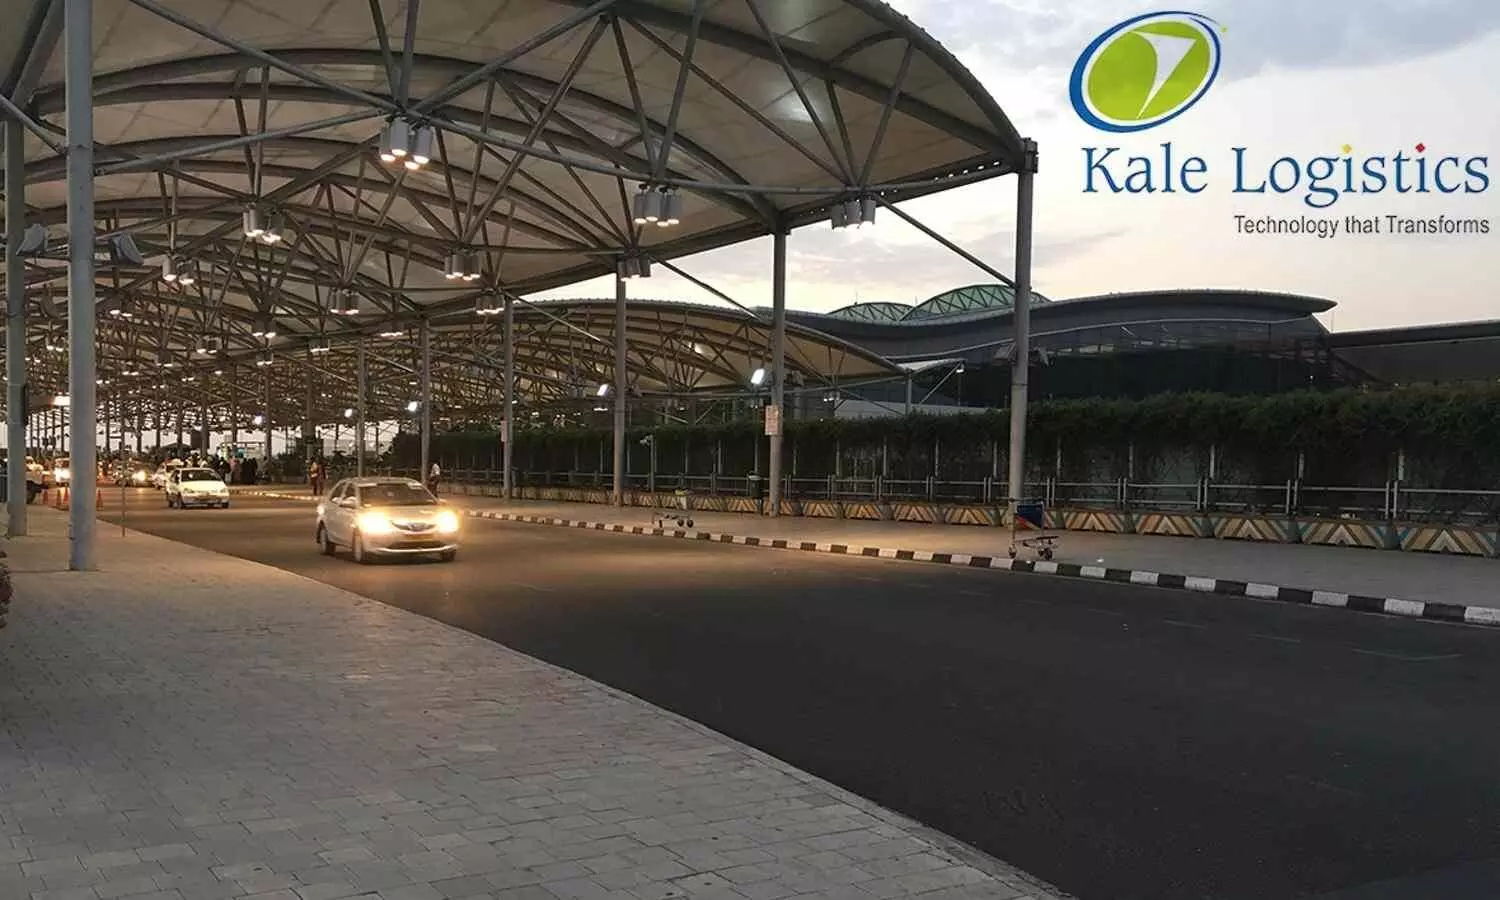 HYD Airport goes live with Airport Cargo Community System by Kale